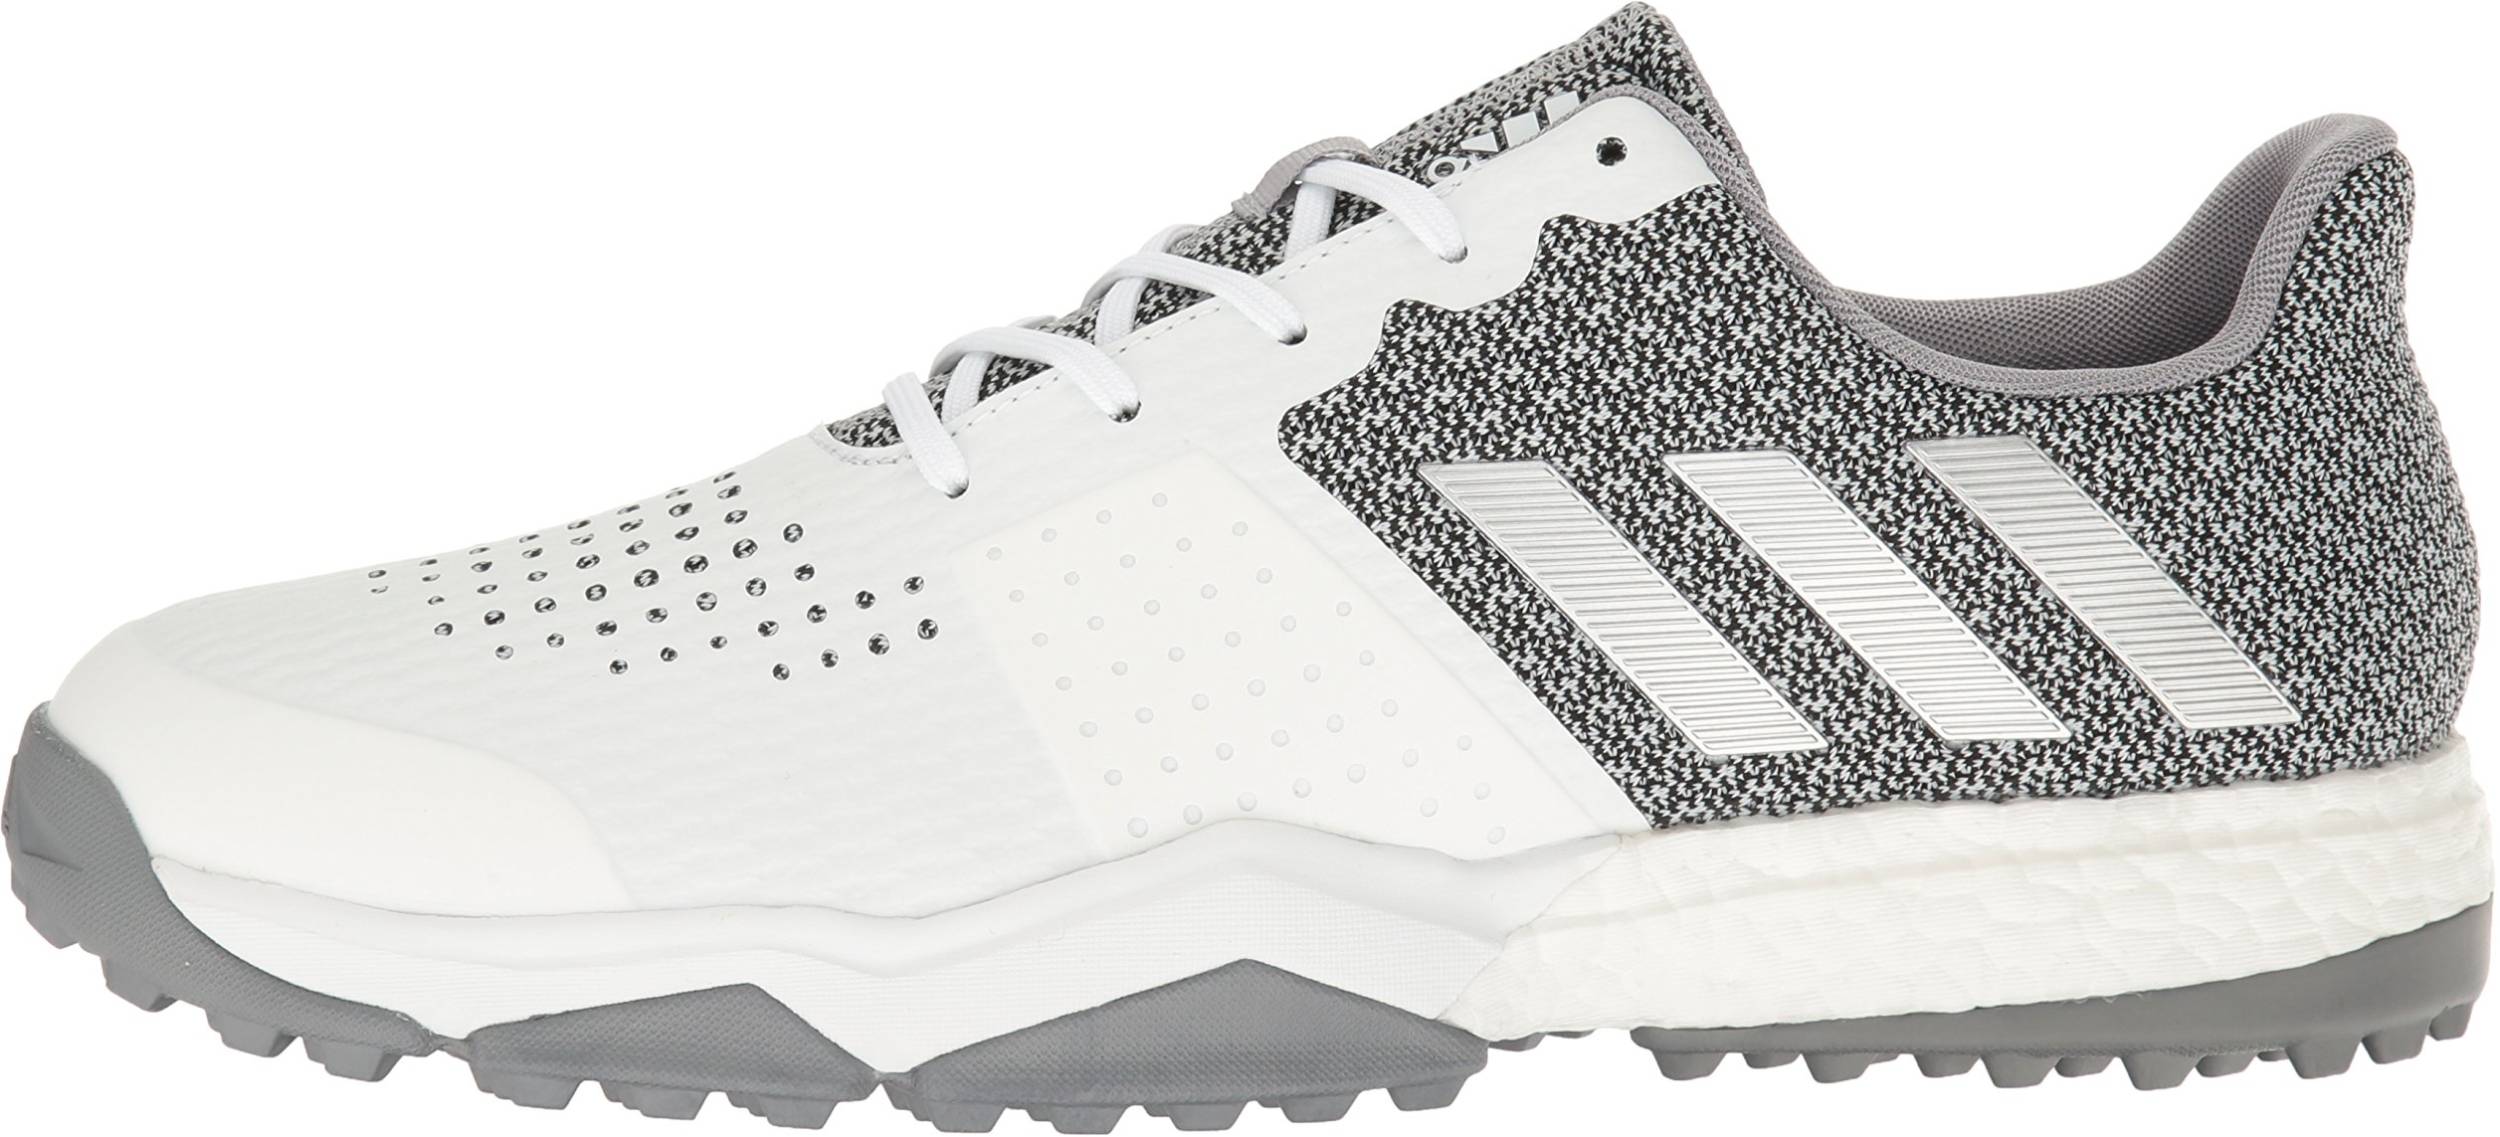 adidas adipower boost 3 golf shoes review